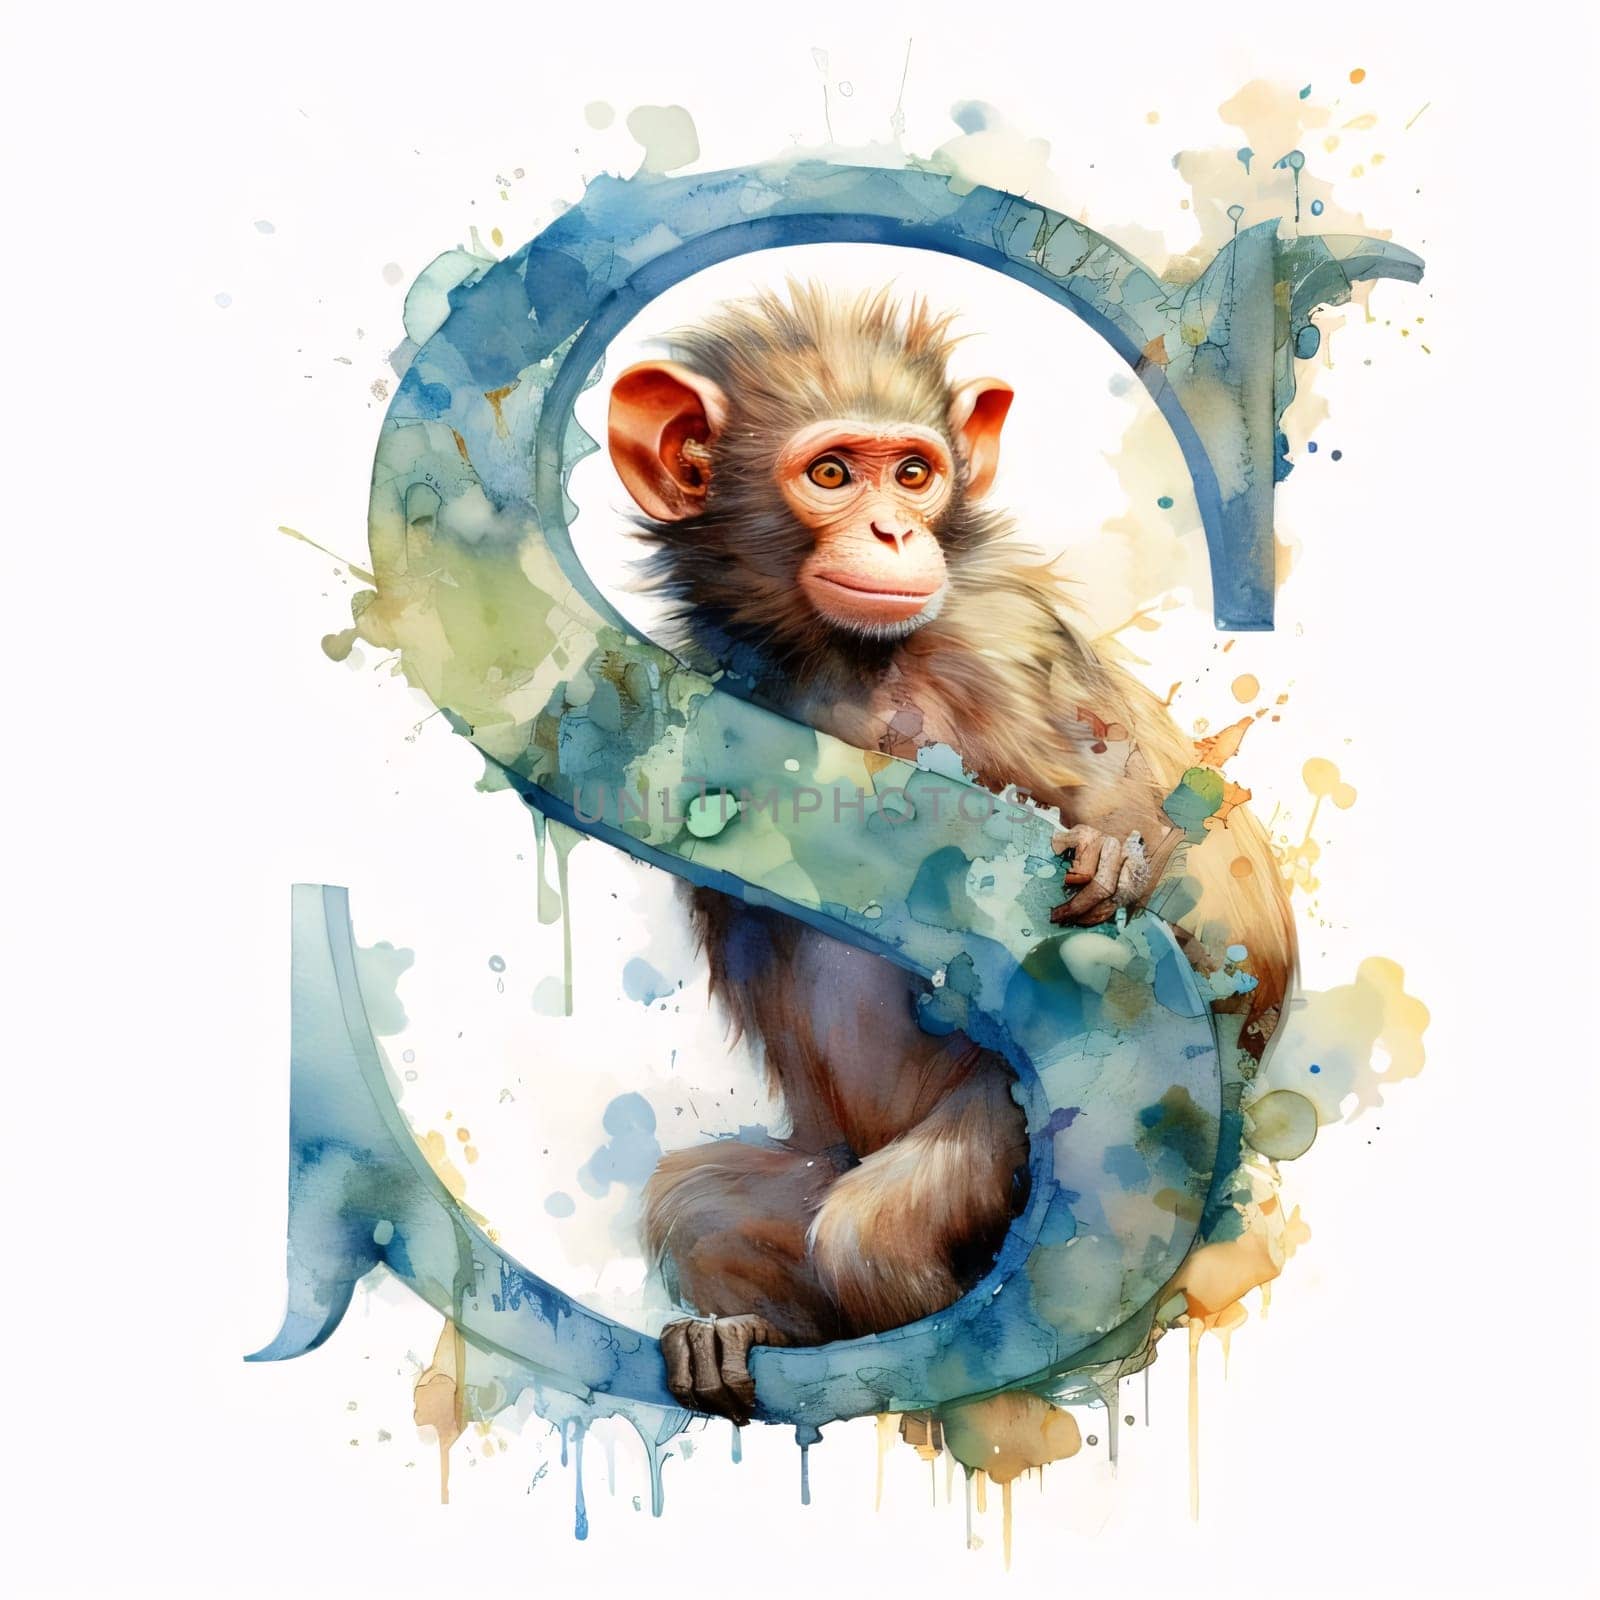 Graphic alphabet letters: Cartoon image of a monkey sitting on the letter S with watercolor splashes